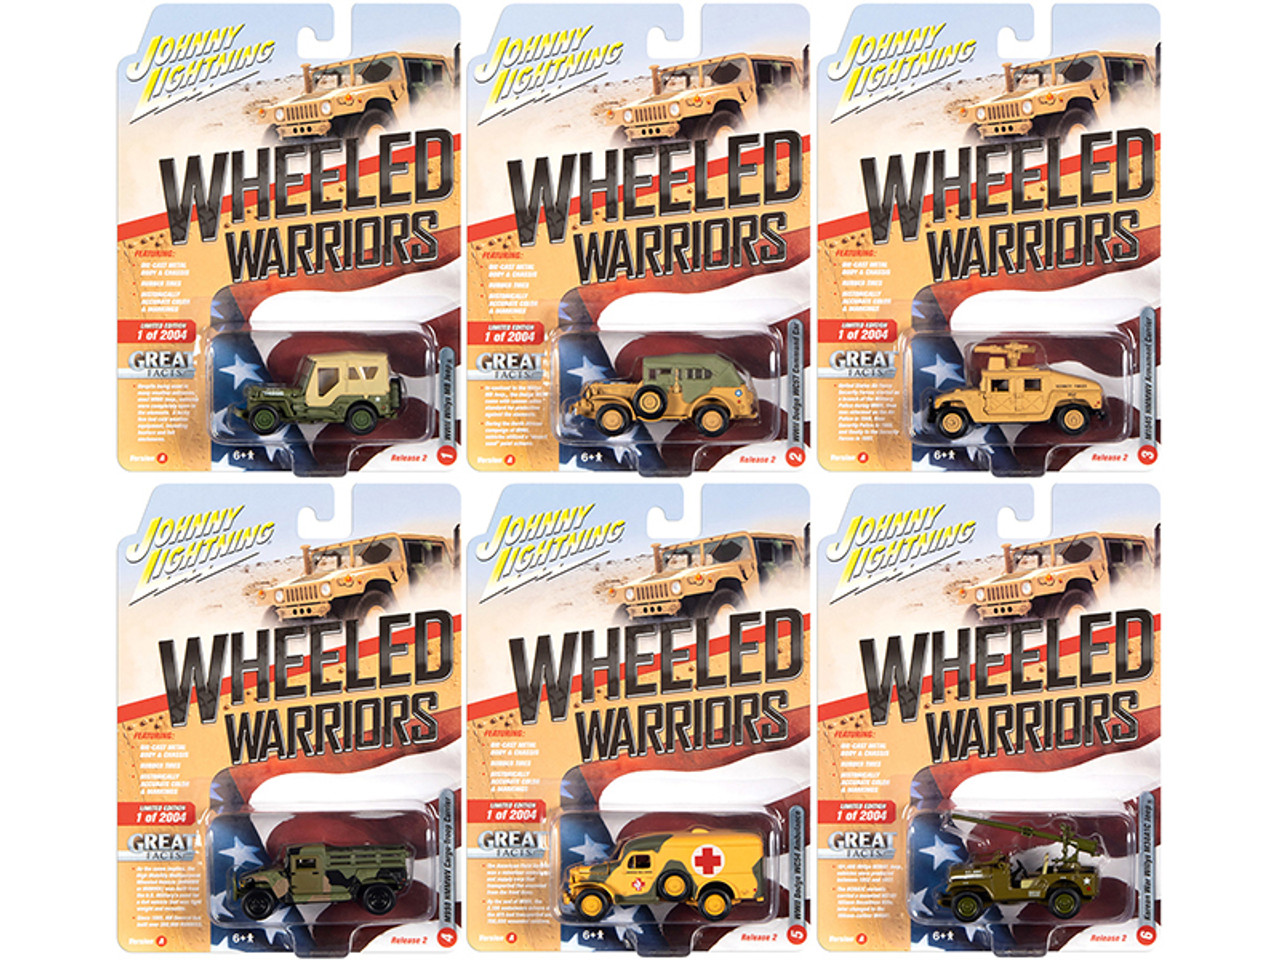 "Wheeled Warriors" Set A of 6 pieces Military Release 2 Limited Edition to 2004 pieces Worldwide 1/64 Diecast Model Cars by Johnny Lightning